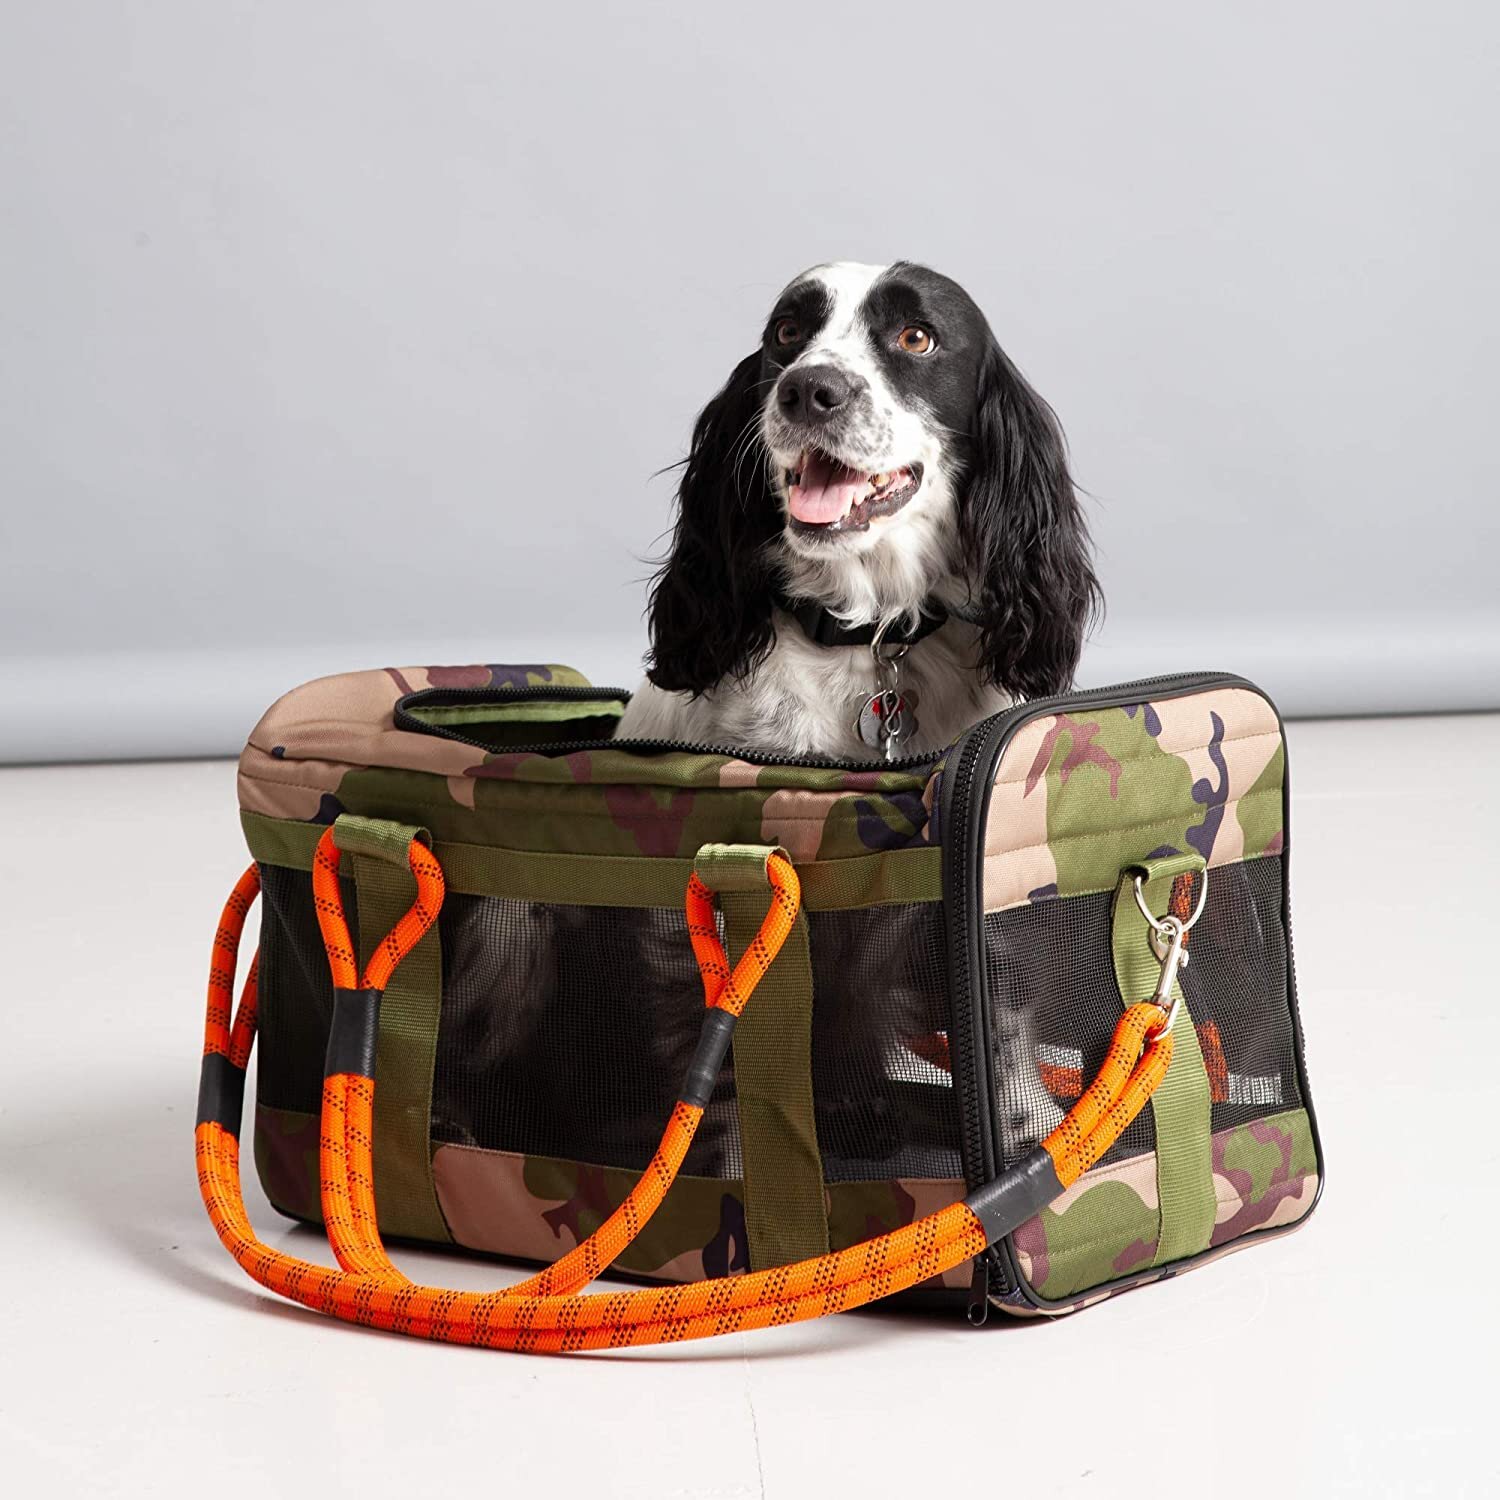 ROVERLUND Adventure & Travel Gear for Dogs